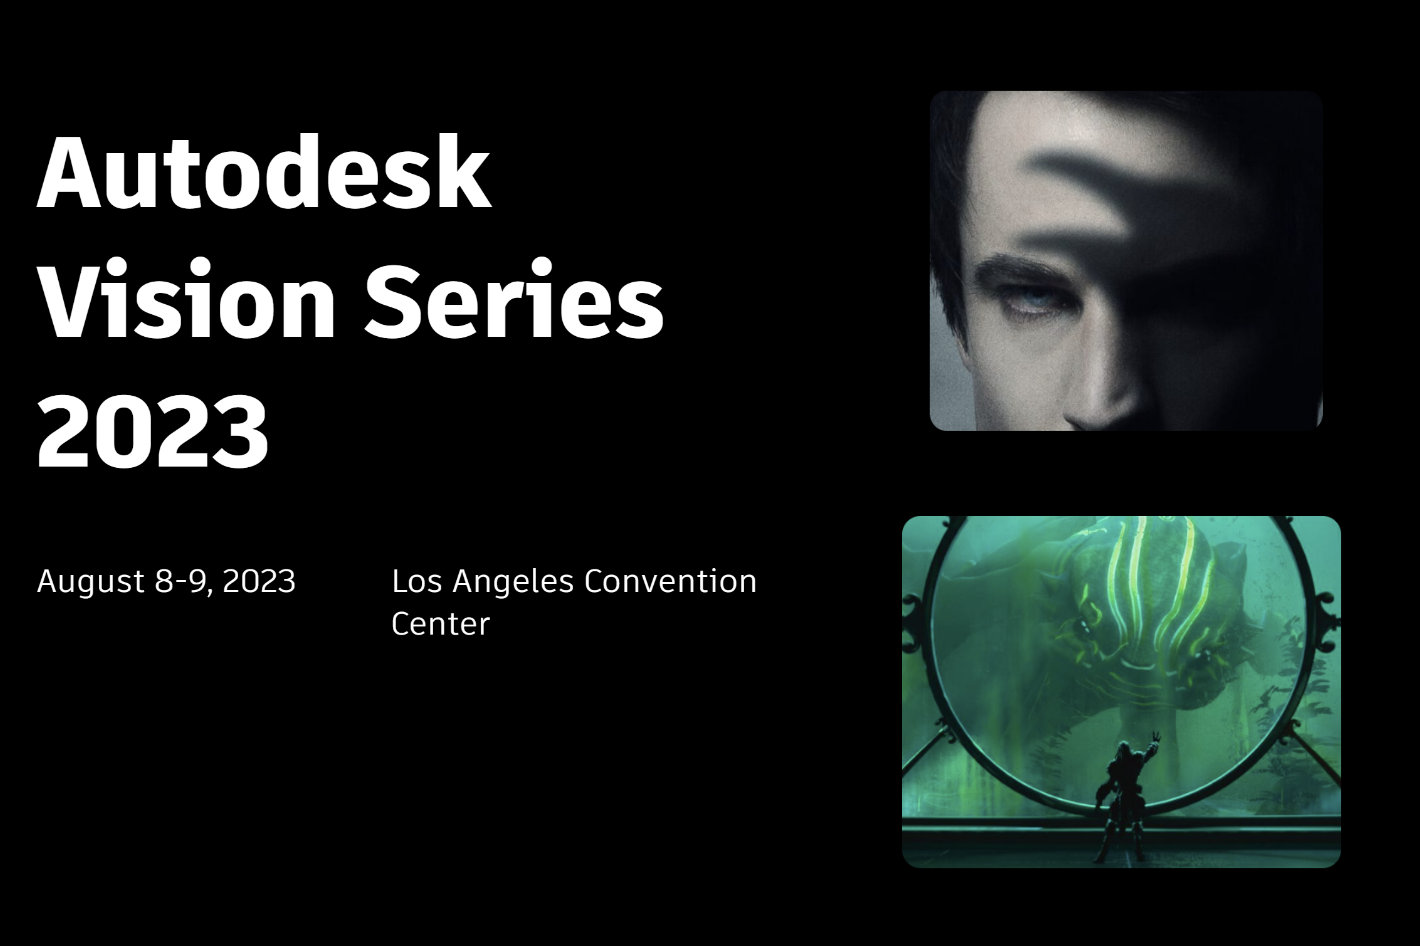 Discover the Autodesk Vision Series 2023 at SIGGRAPH